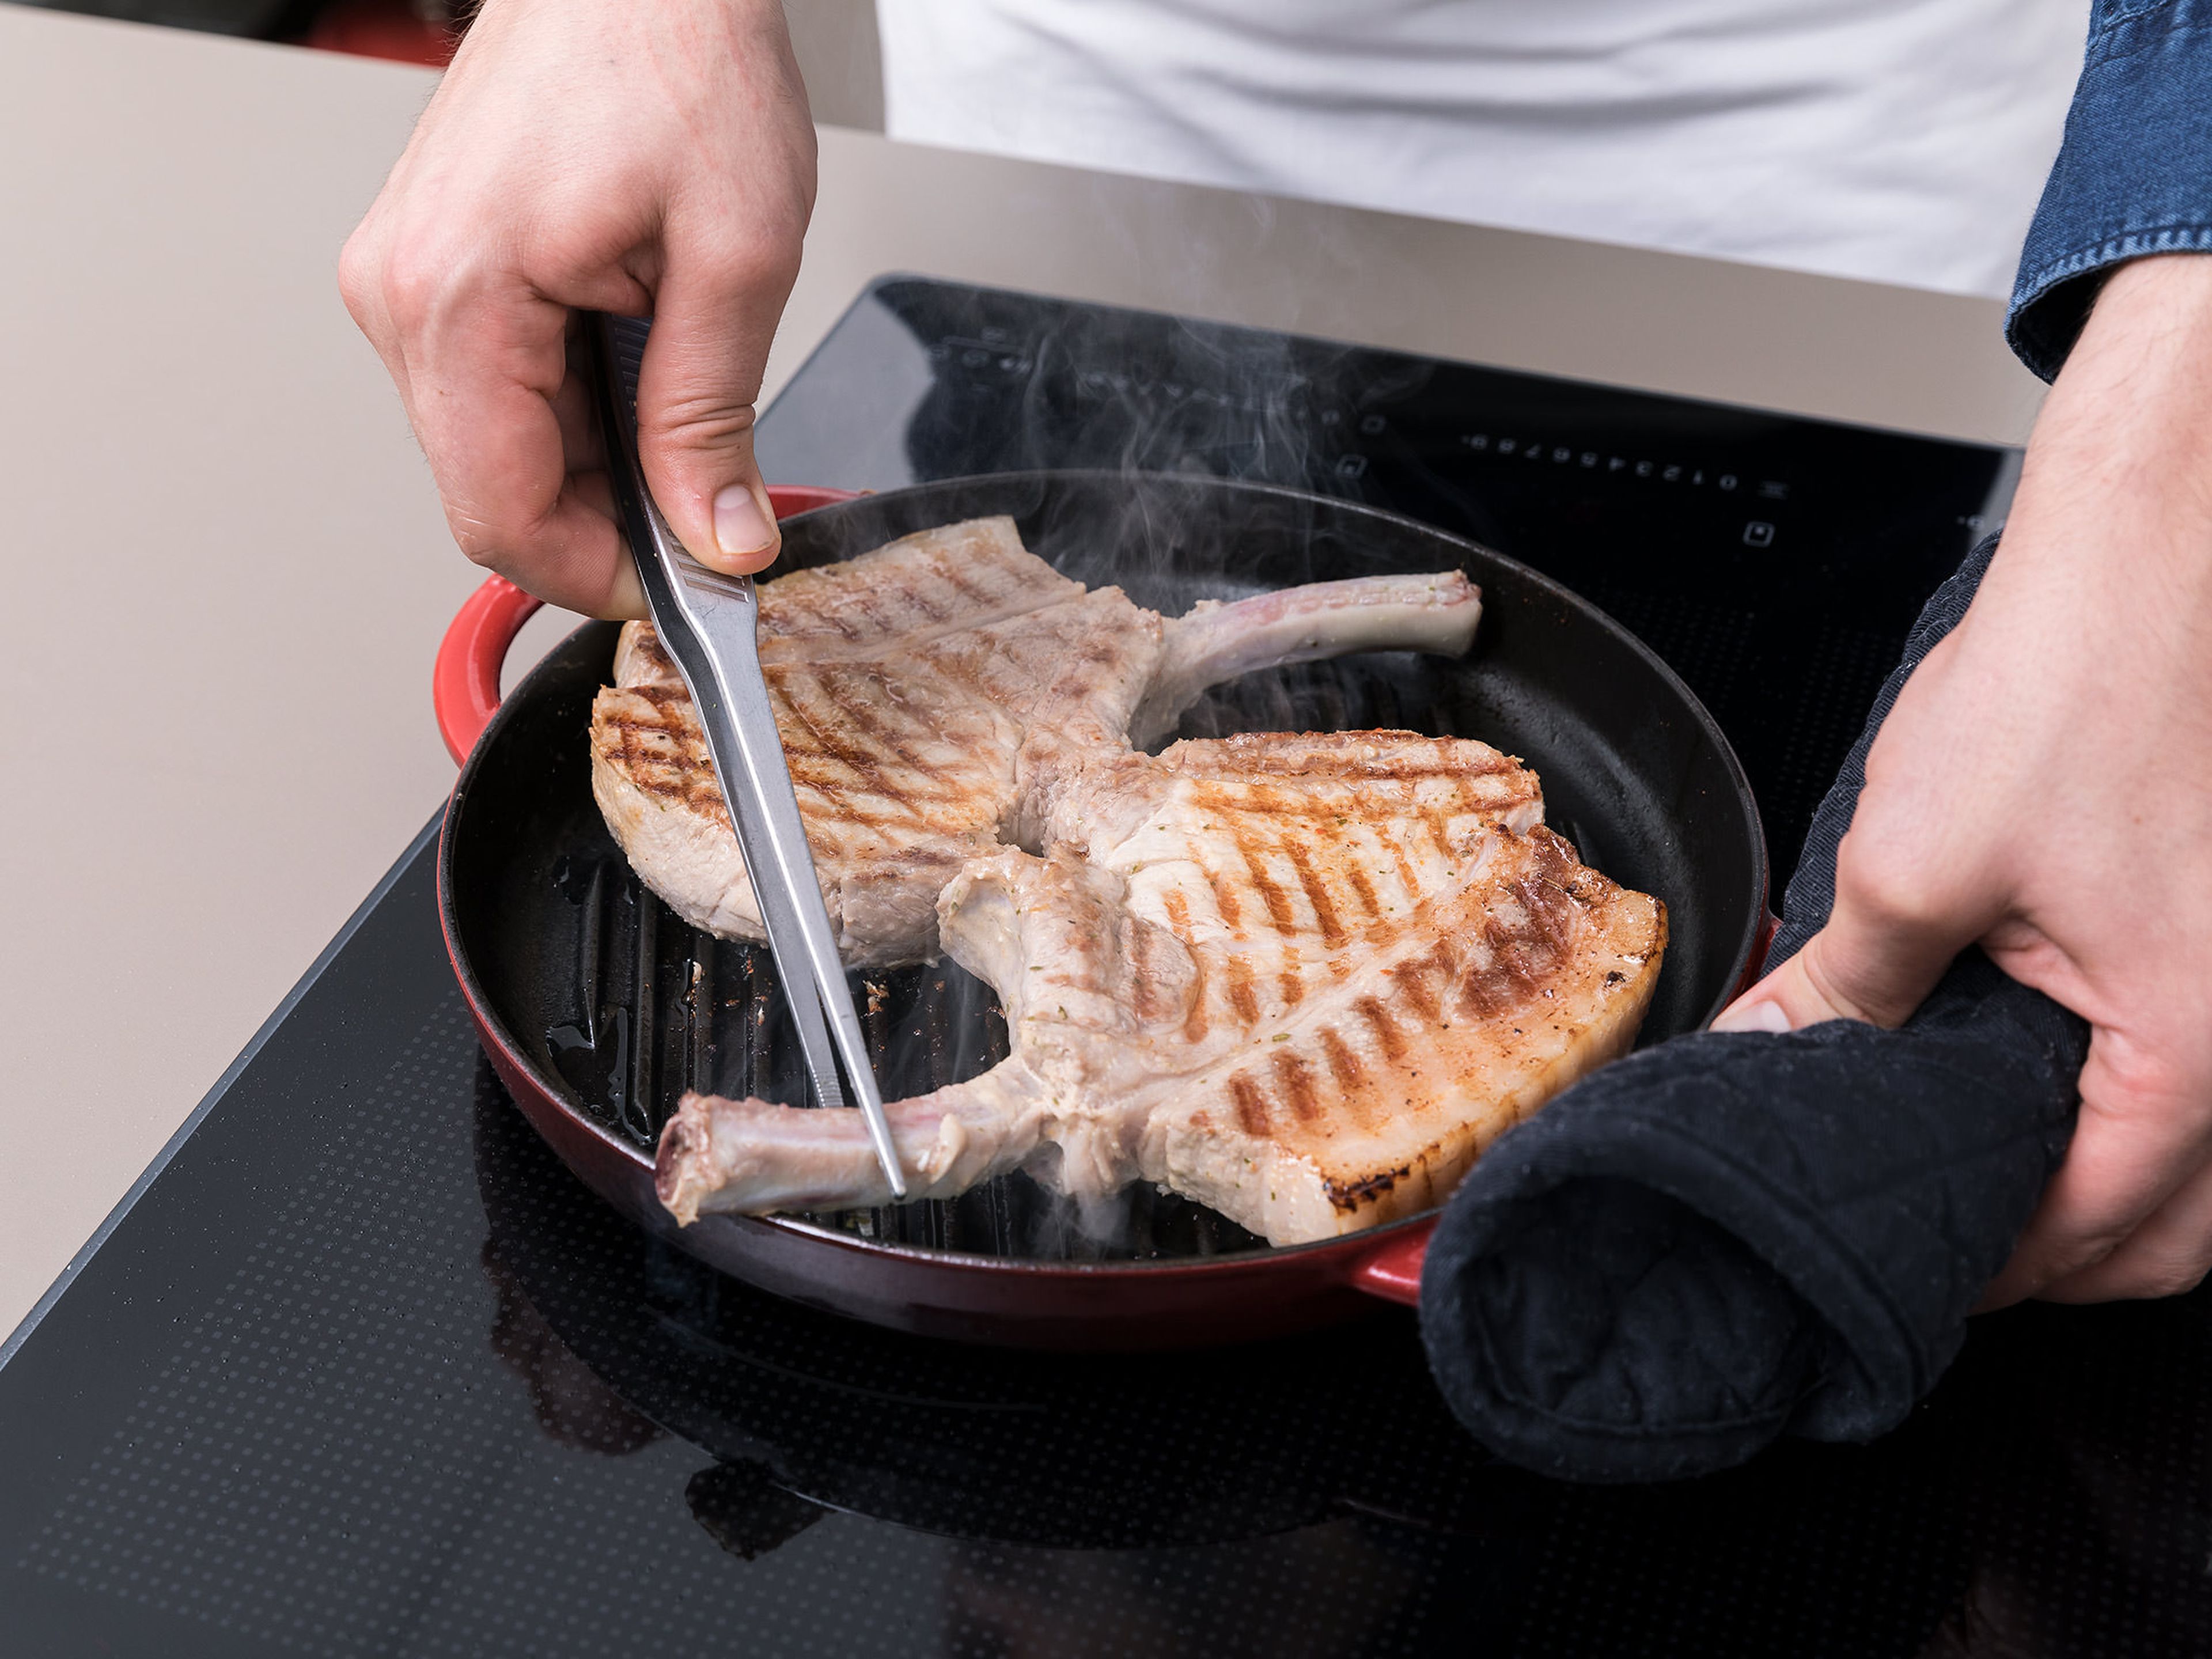 Cook meats to desired level of doneness using a grill, grill pan, or oven. Serve and enjoy!